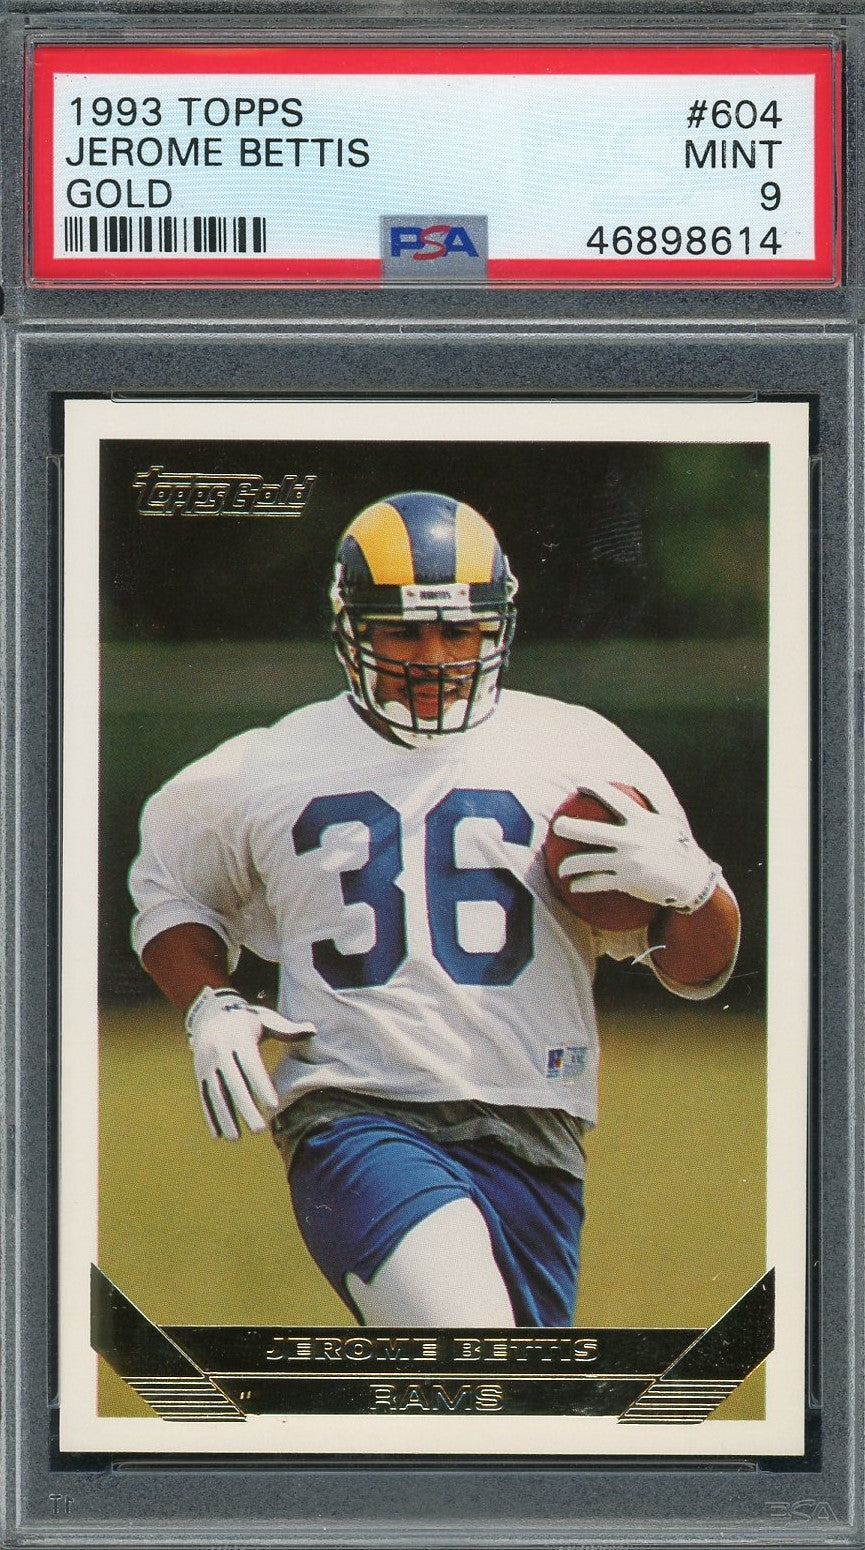 Jerome Bettis 1993 Topps Gold Football Rookie Card #604 Graded PSA 9